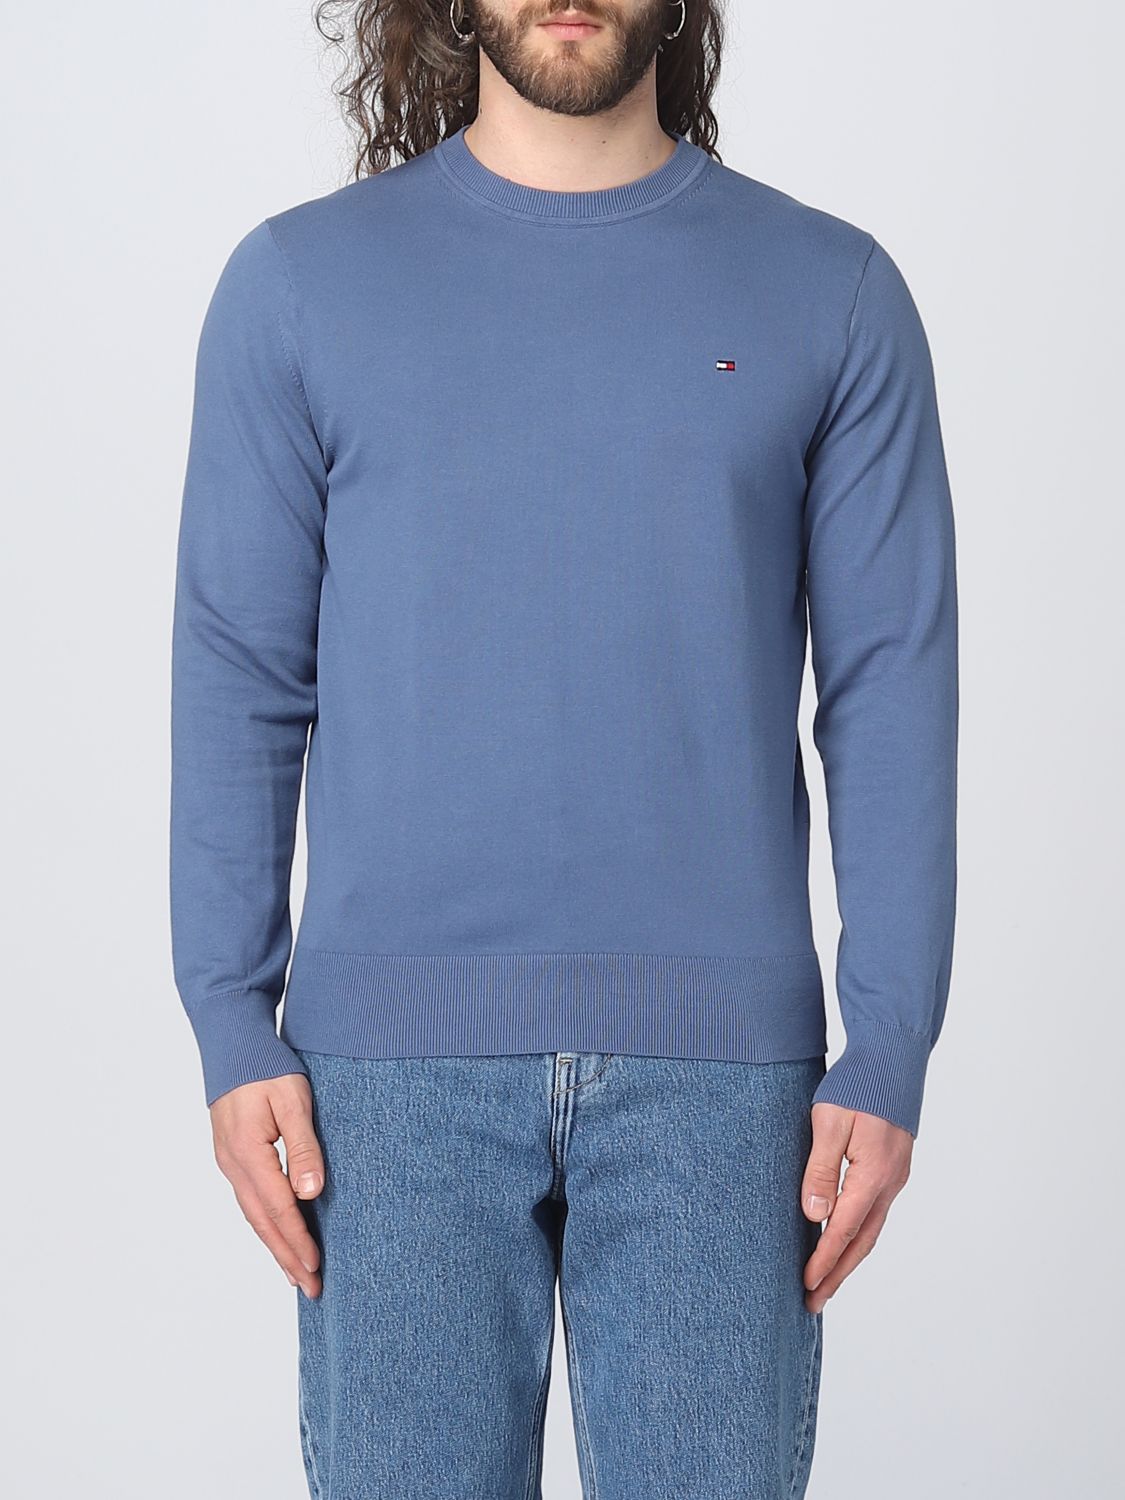 TOMMY HILFIGER: sweater for man - Blue | Tommy Hilfiger sweater ...